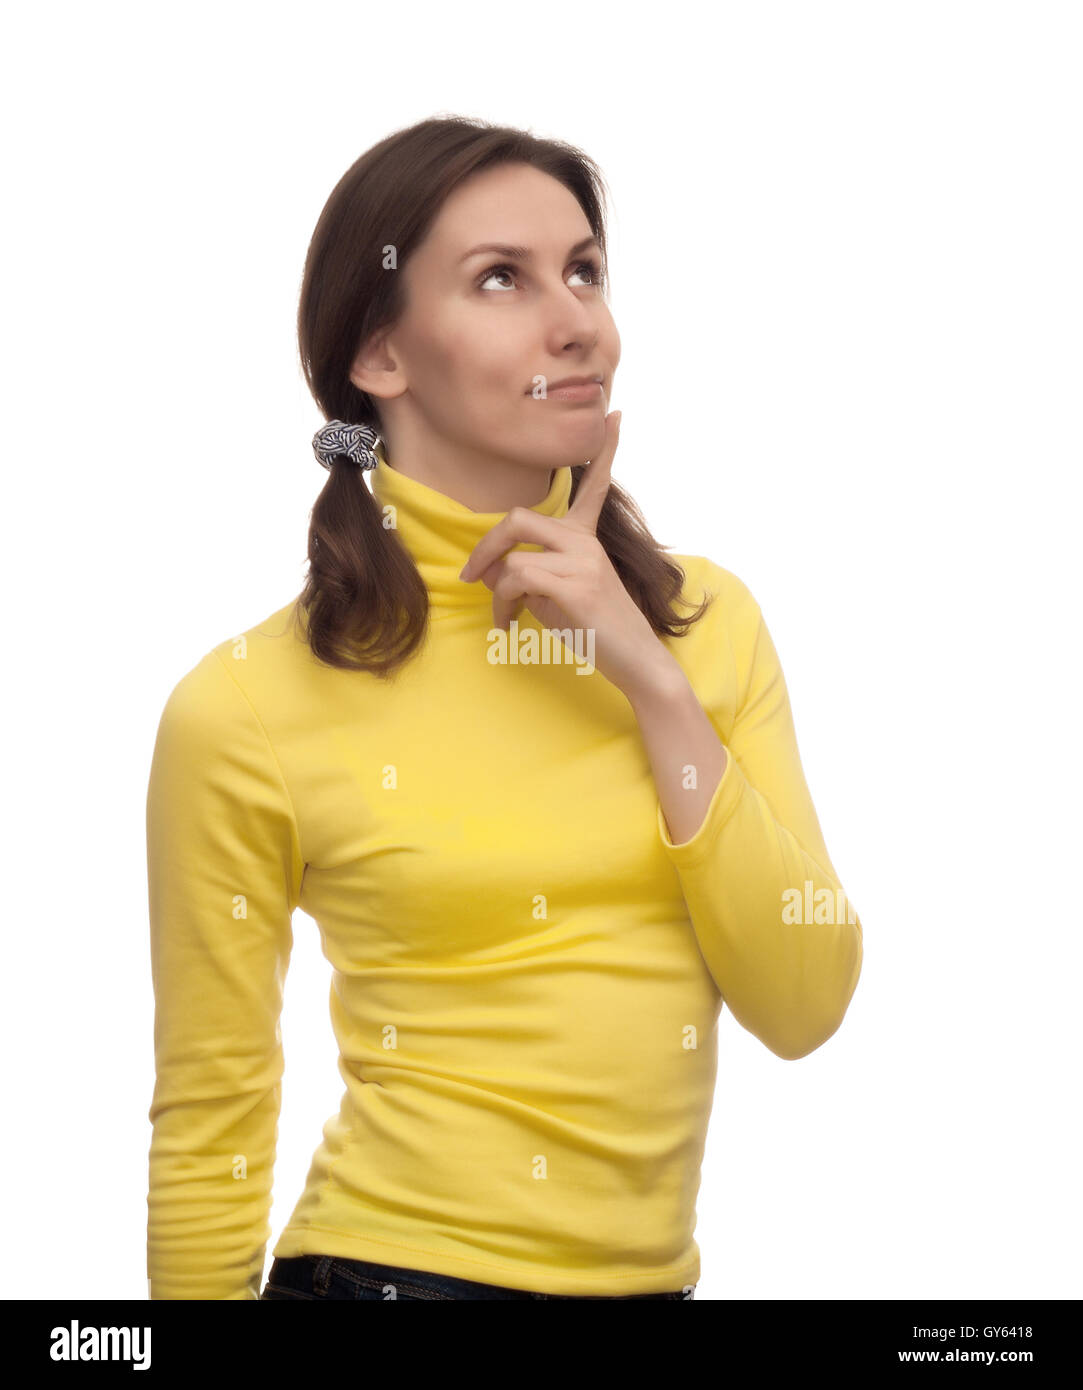 Very thin girl stock photo. Image of perfect, people - 65664986